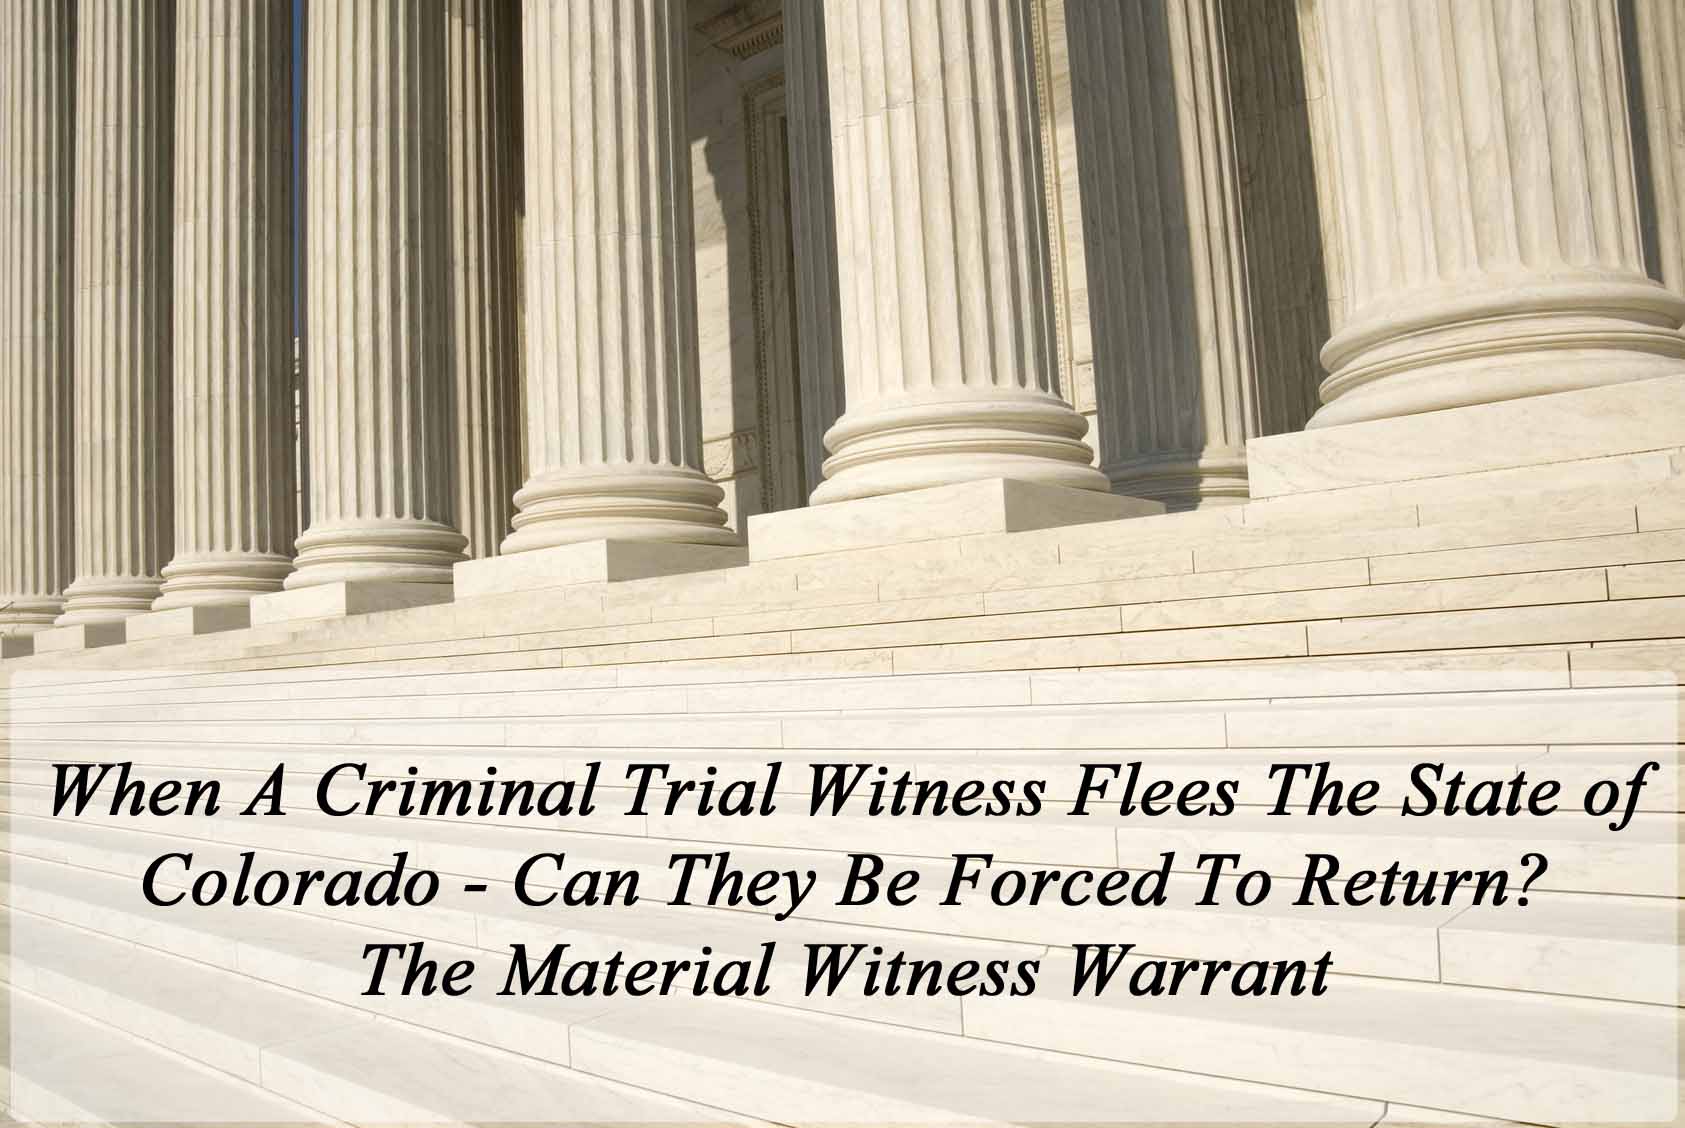 When A Criminal Trial Witness Flees The State - Can They Be Forced To Return? - The Material Witness Warrant